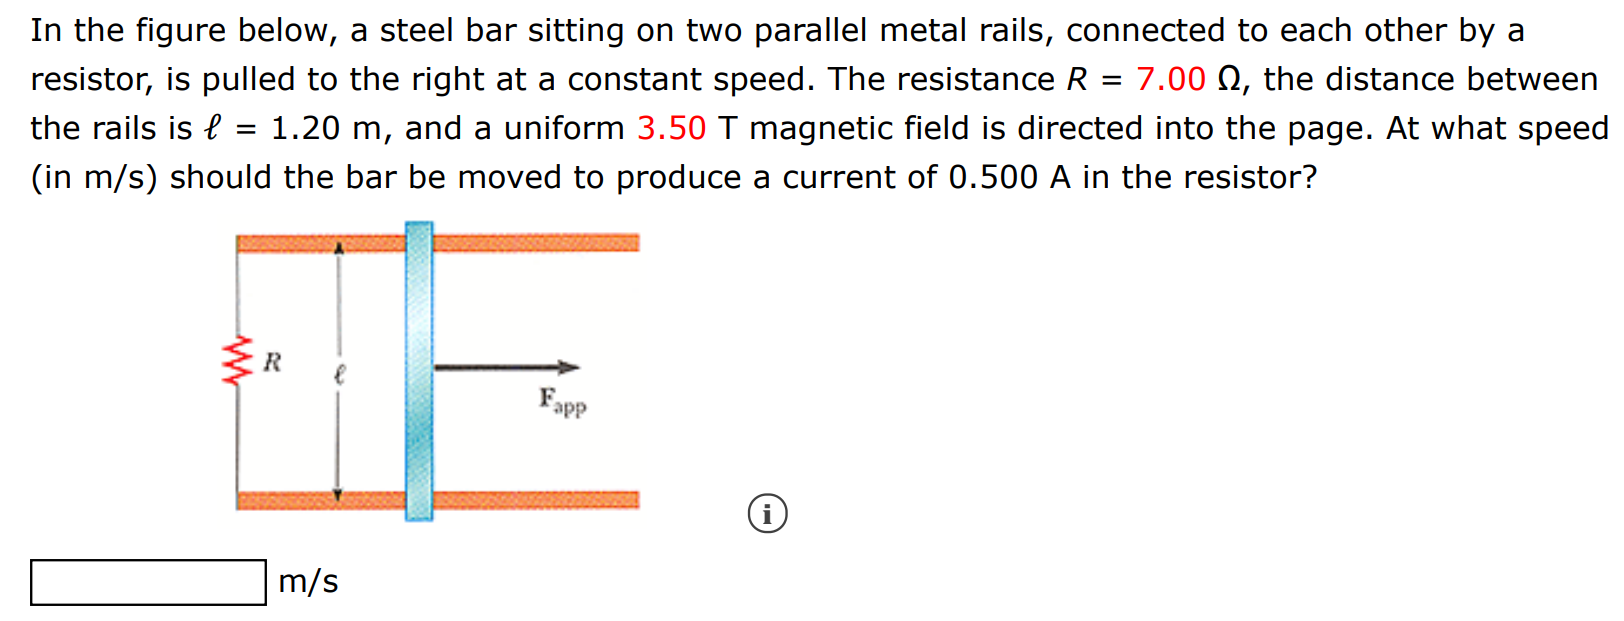 In the figure below, a steel bar sitting on two parallel metal rails, connected to each other by a resistor, is pulled to the right at a constant speed. The resistance R = 7.00 Ω, the distance between the rails is ℓ = 1.20 m, and a uniform 3.50 T magnetic field is directed into the page. At what speed (in m/s) should the bar be moved to produce a current of 0.500 A in the resistor? m/s 